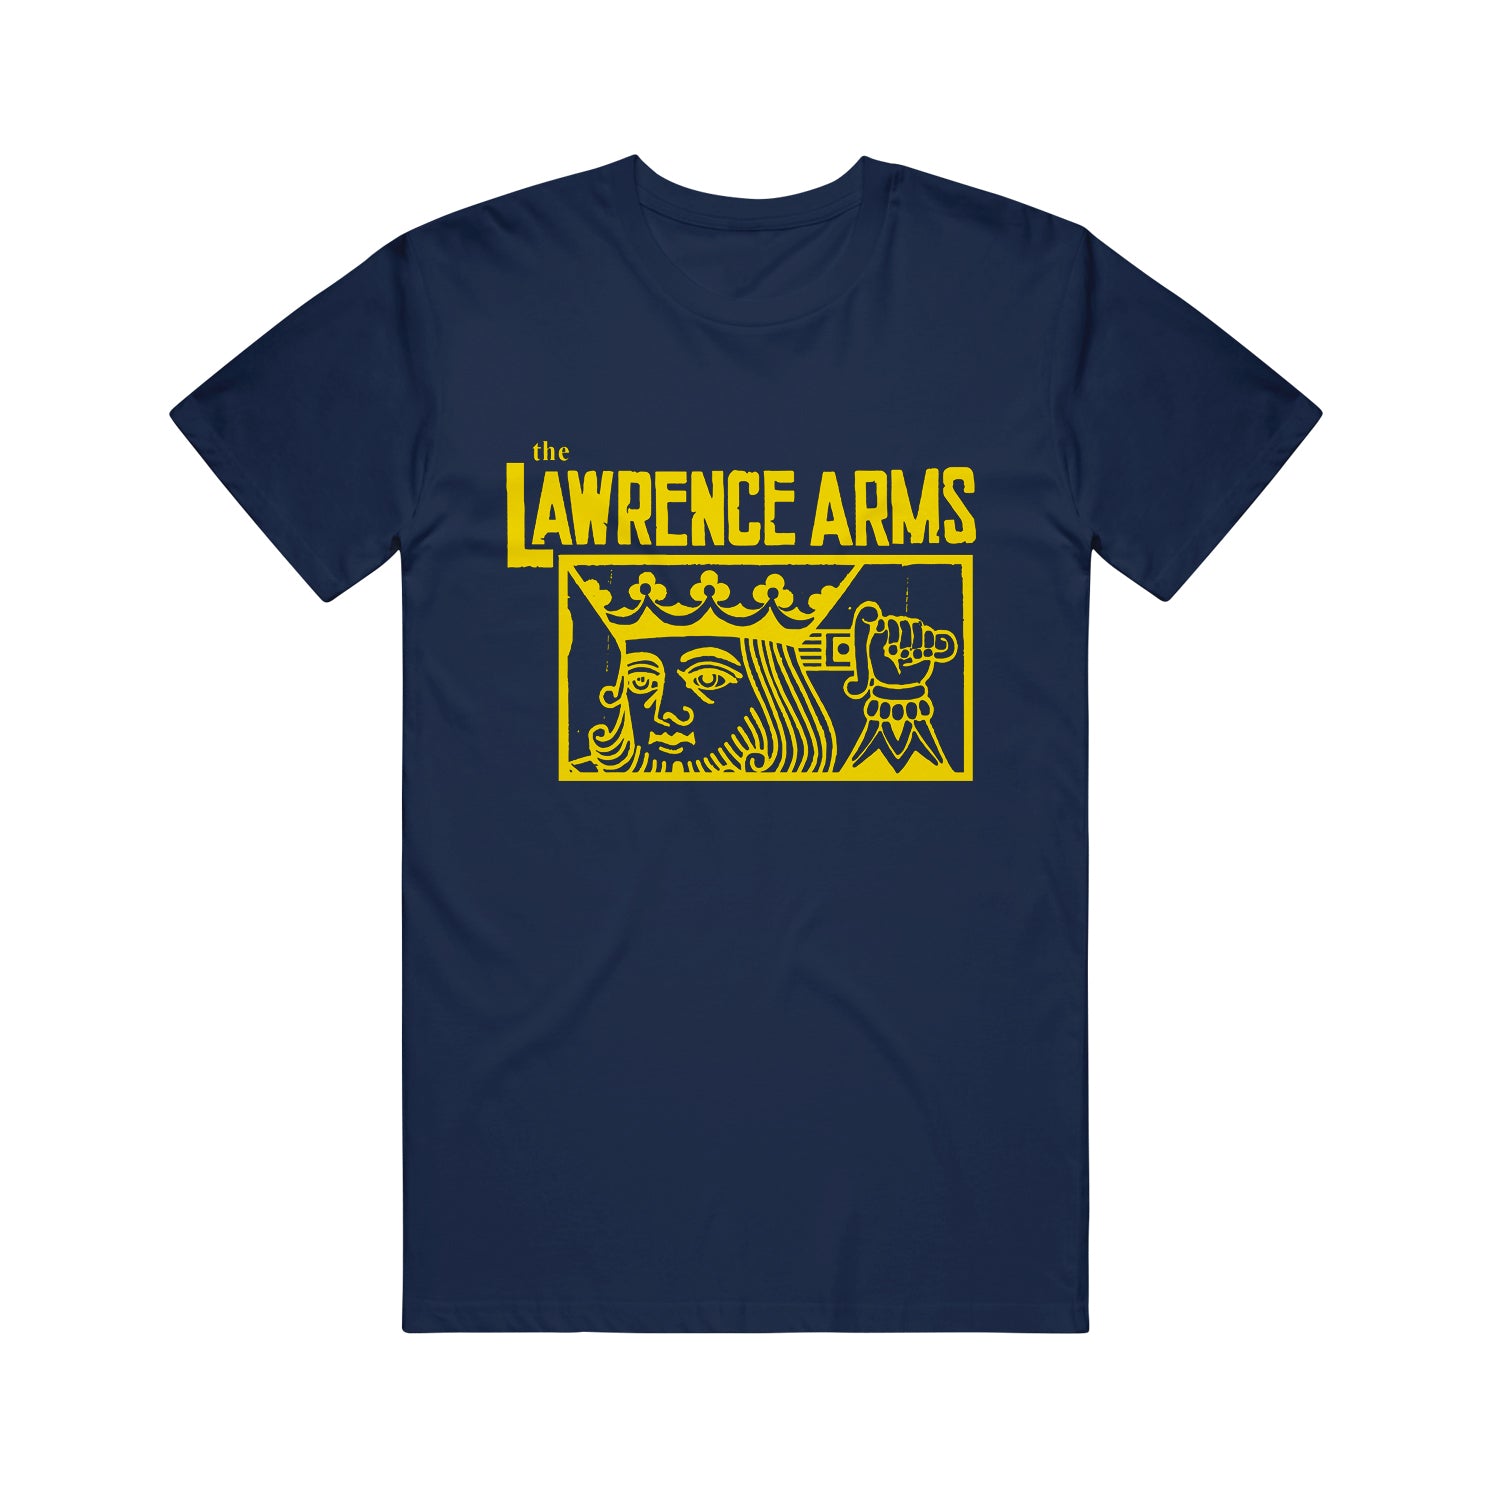 Image of a navy tshirt against a white background. Across the chest in yellow text reads "the lawrence arms". Below that inside of a yellow outlined rectangle is a graphic of a king holding a sword behind his head.